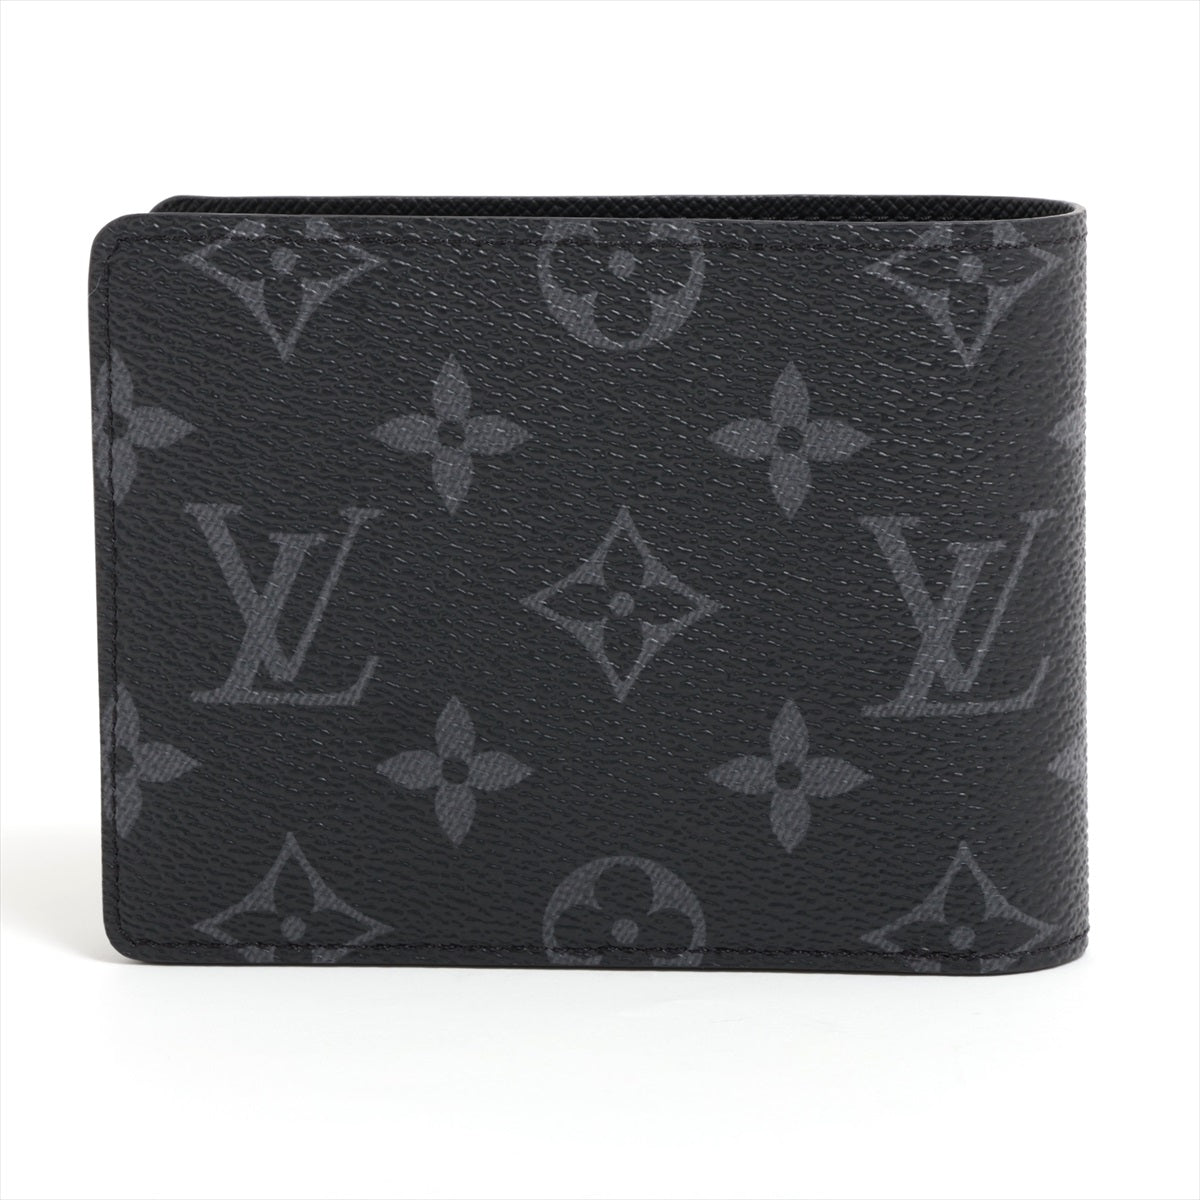 Louis Vuitton Monogram Eclipse Portefeuille Myrtiple M61695 Compact Wallet There was an RFID response